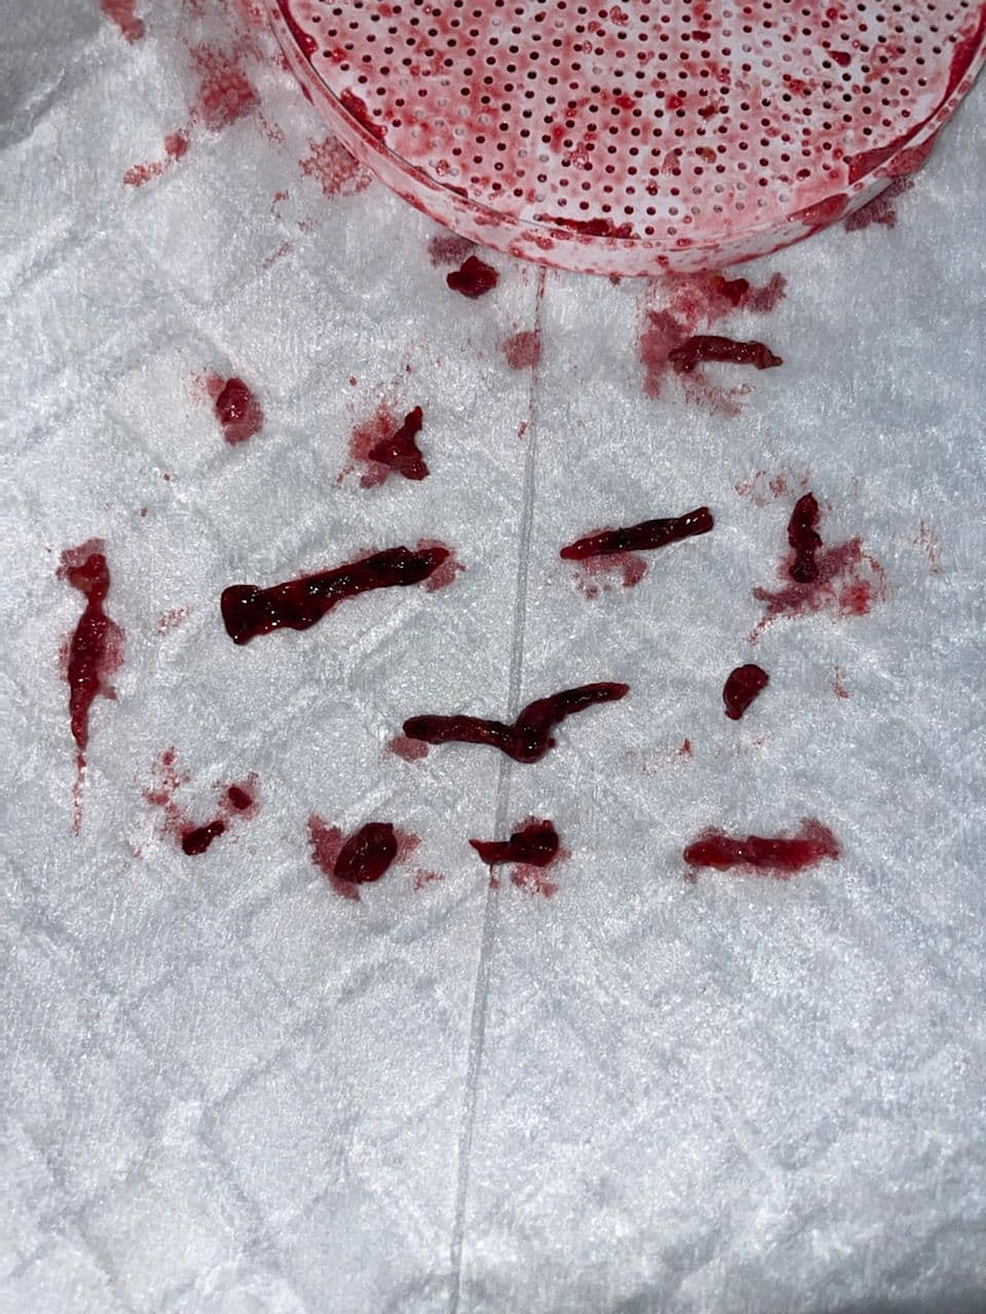 Clot-burden-removed-from-the-left-common-iliac-vein